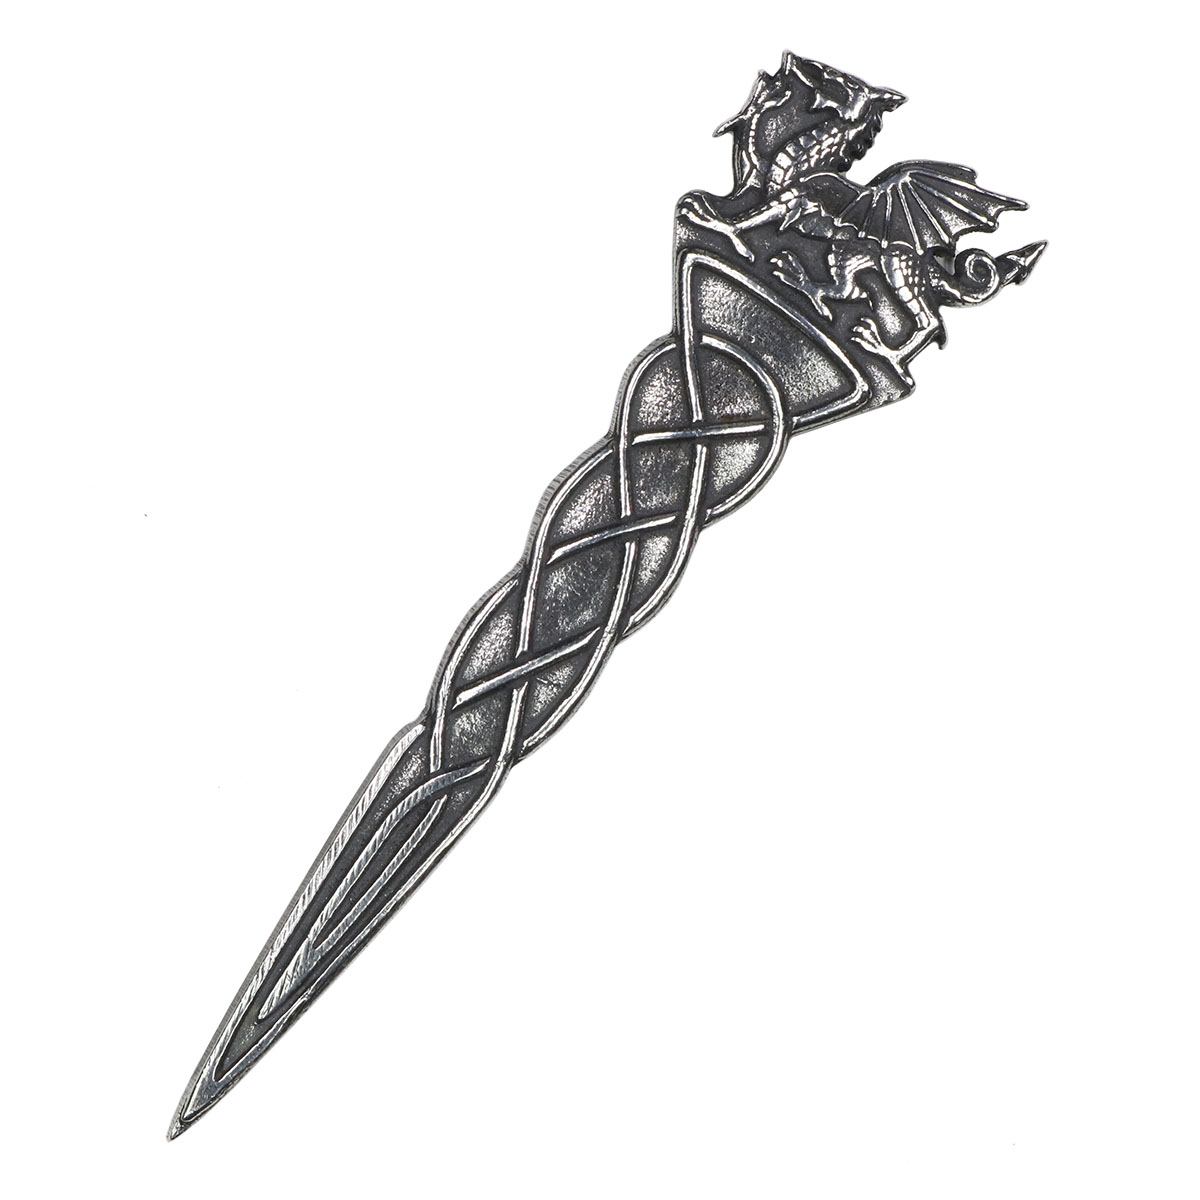 The Welsh Dragon Pewter Kilt Pin, a symbol of Wales and its celtic heritage, is elegantly represented by this pewter kilt pin.